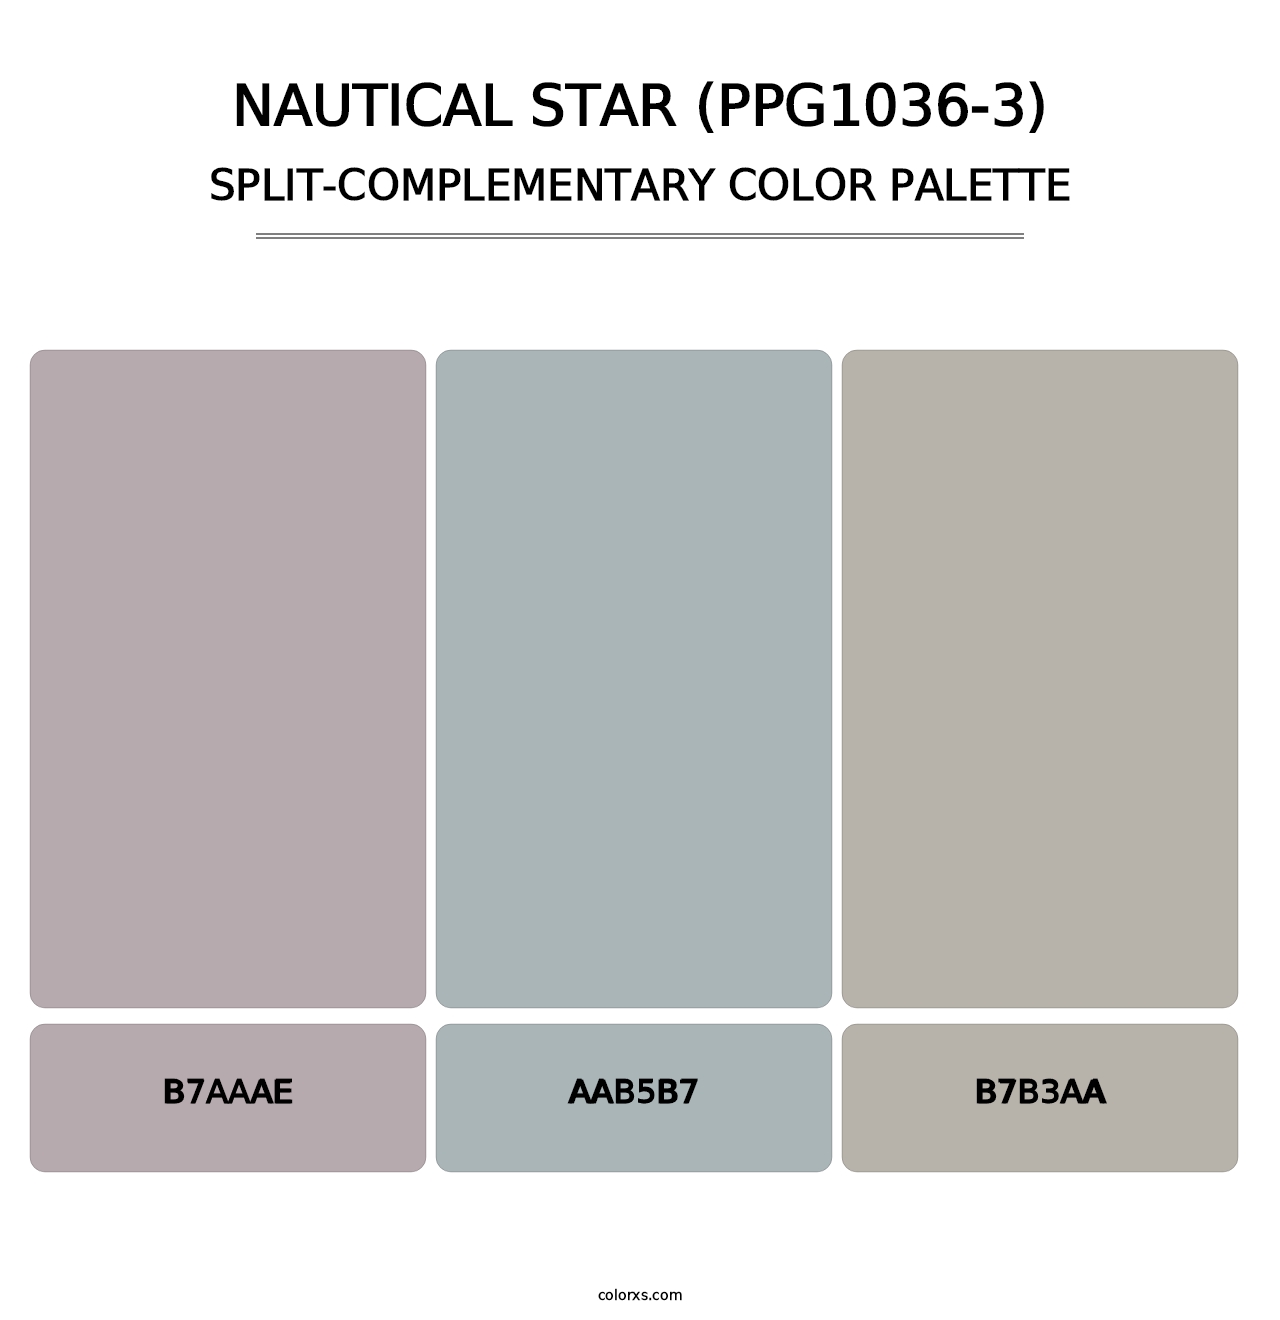 Nautical Star (PPG1036-3) - Split-Complementary Color Palette